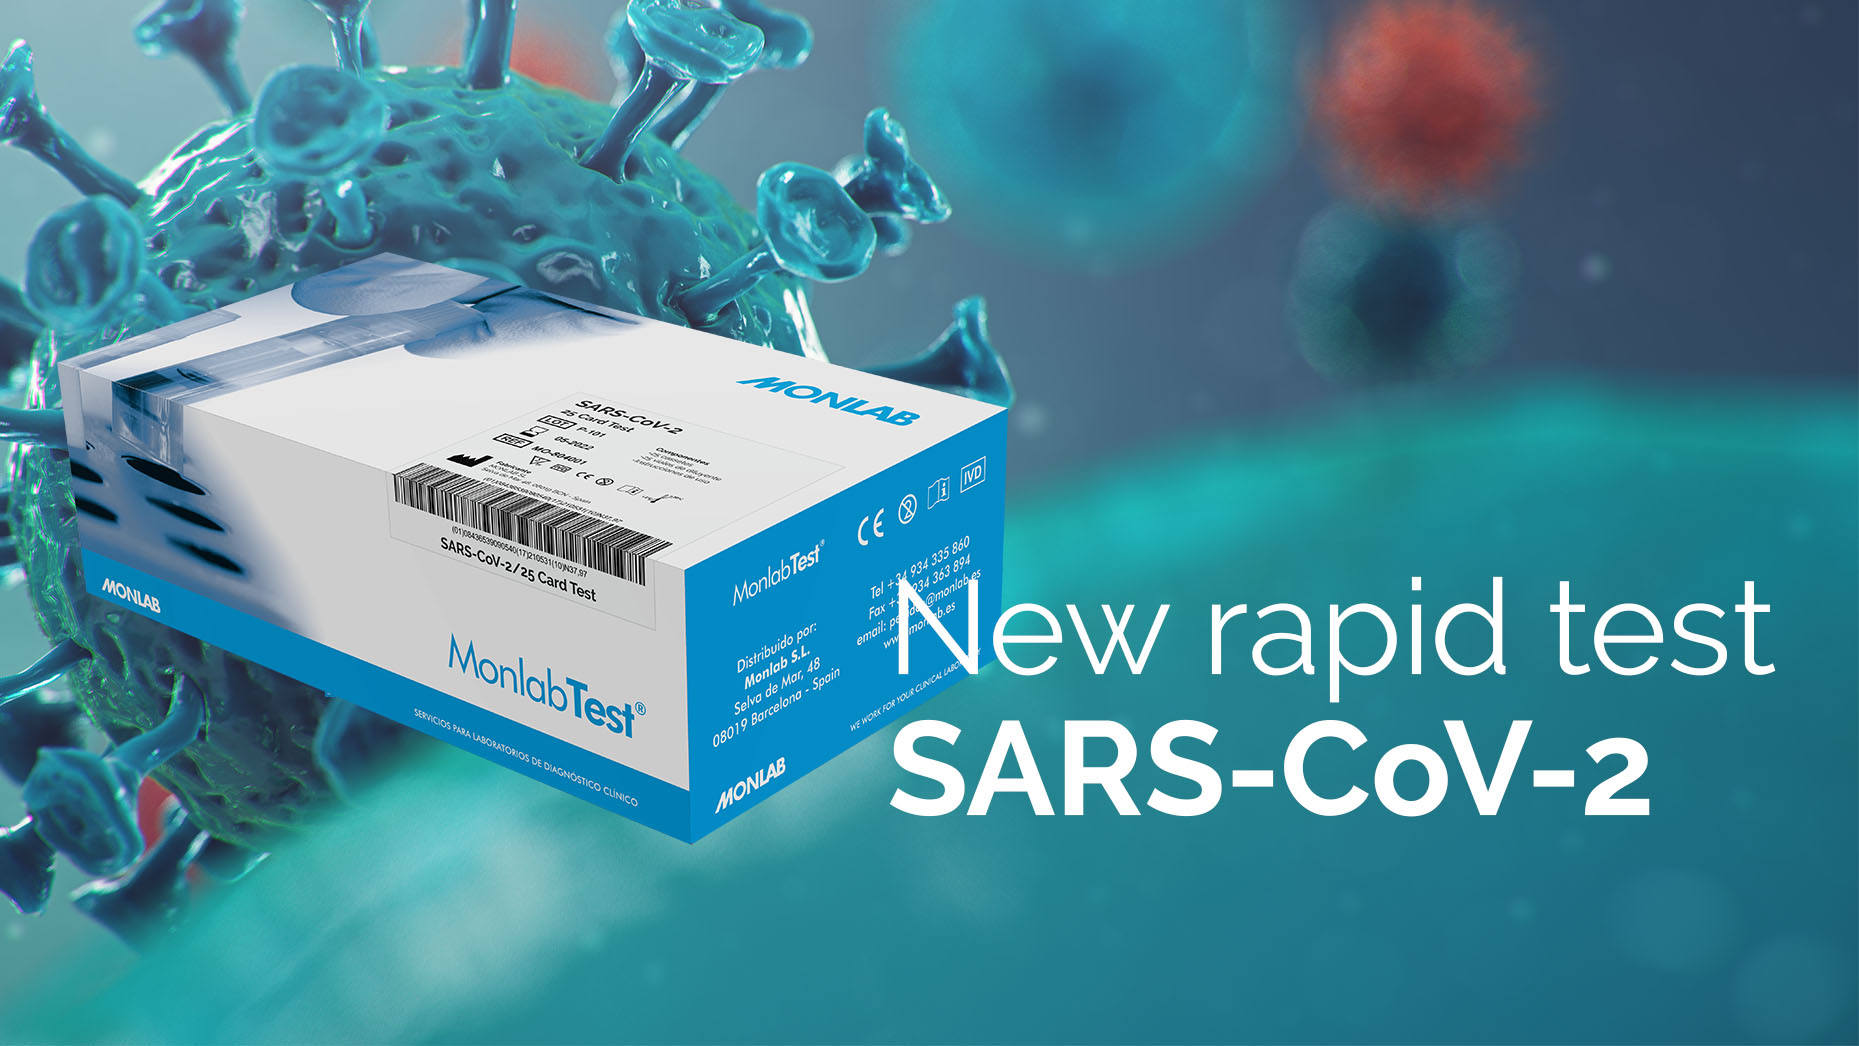 The rapid antigen test is a type of viral screening that looks for specific viral proteins of SARS-CoV-2 in respiratory samples